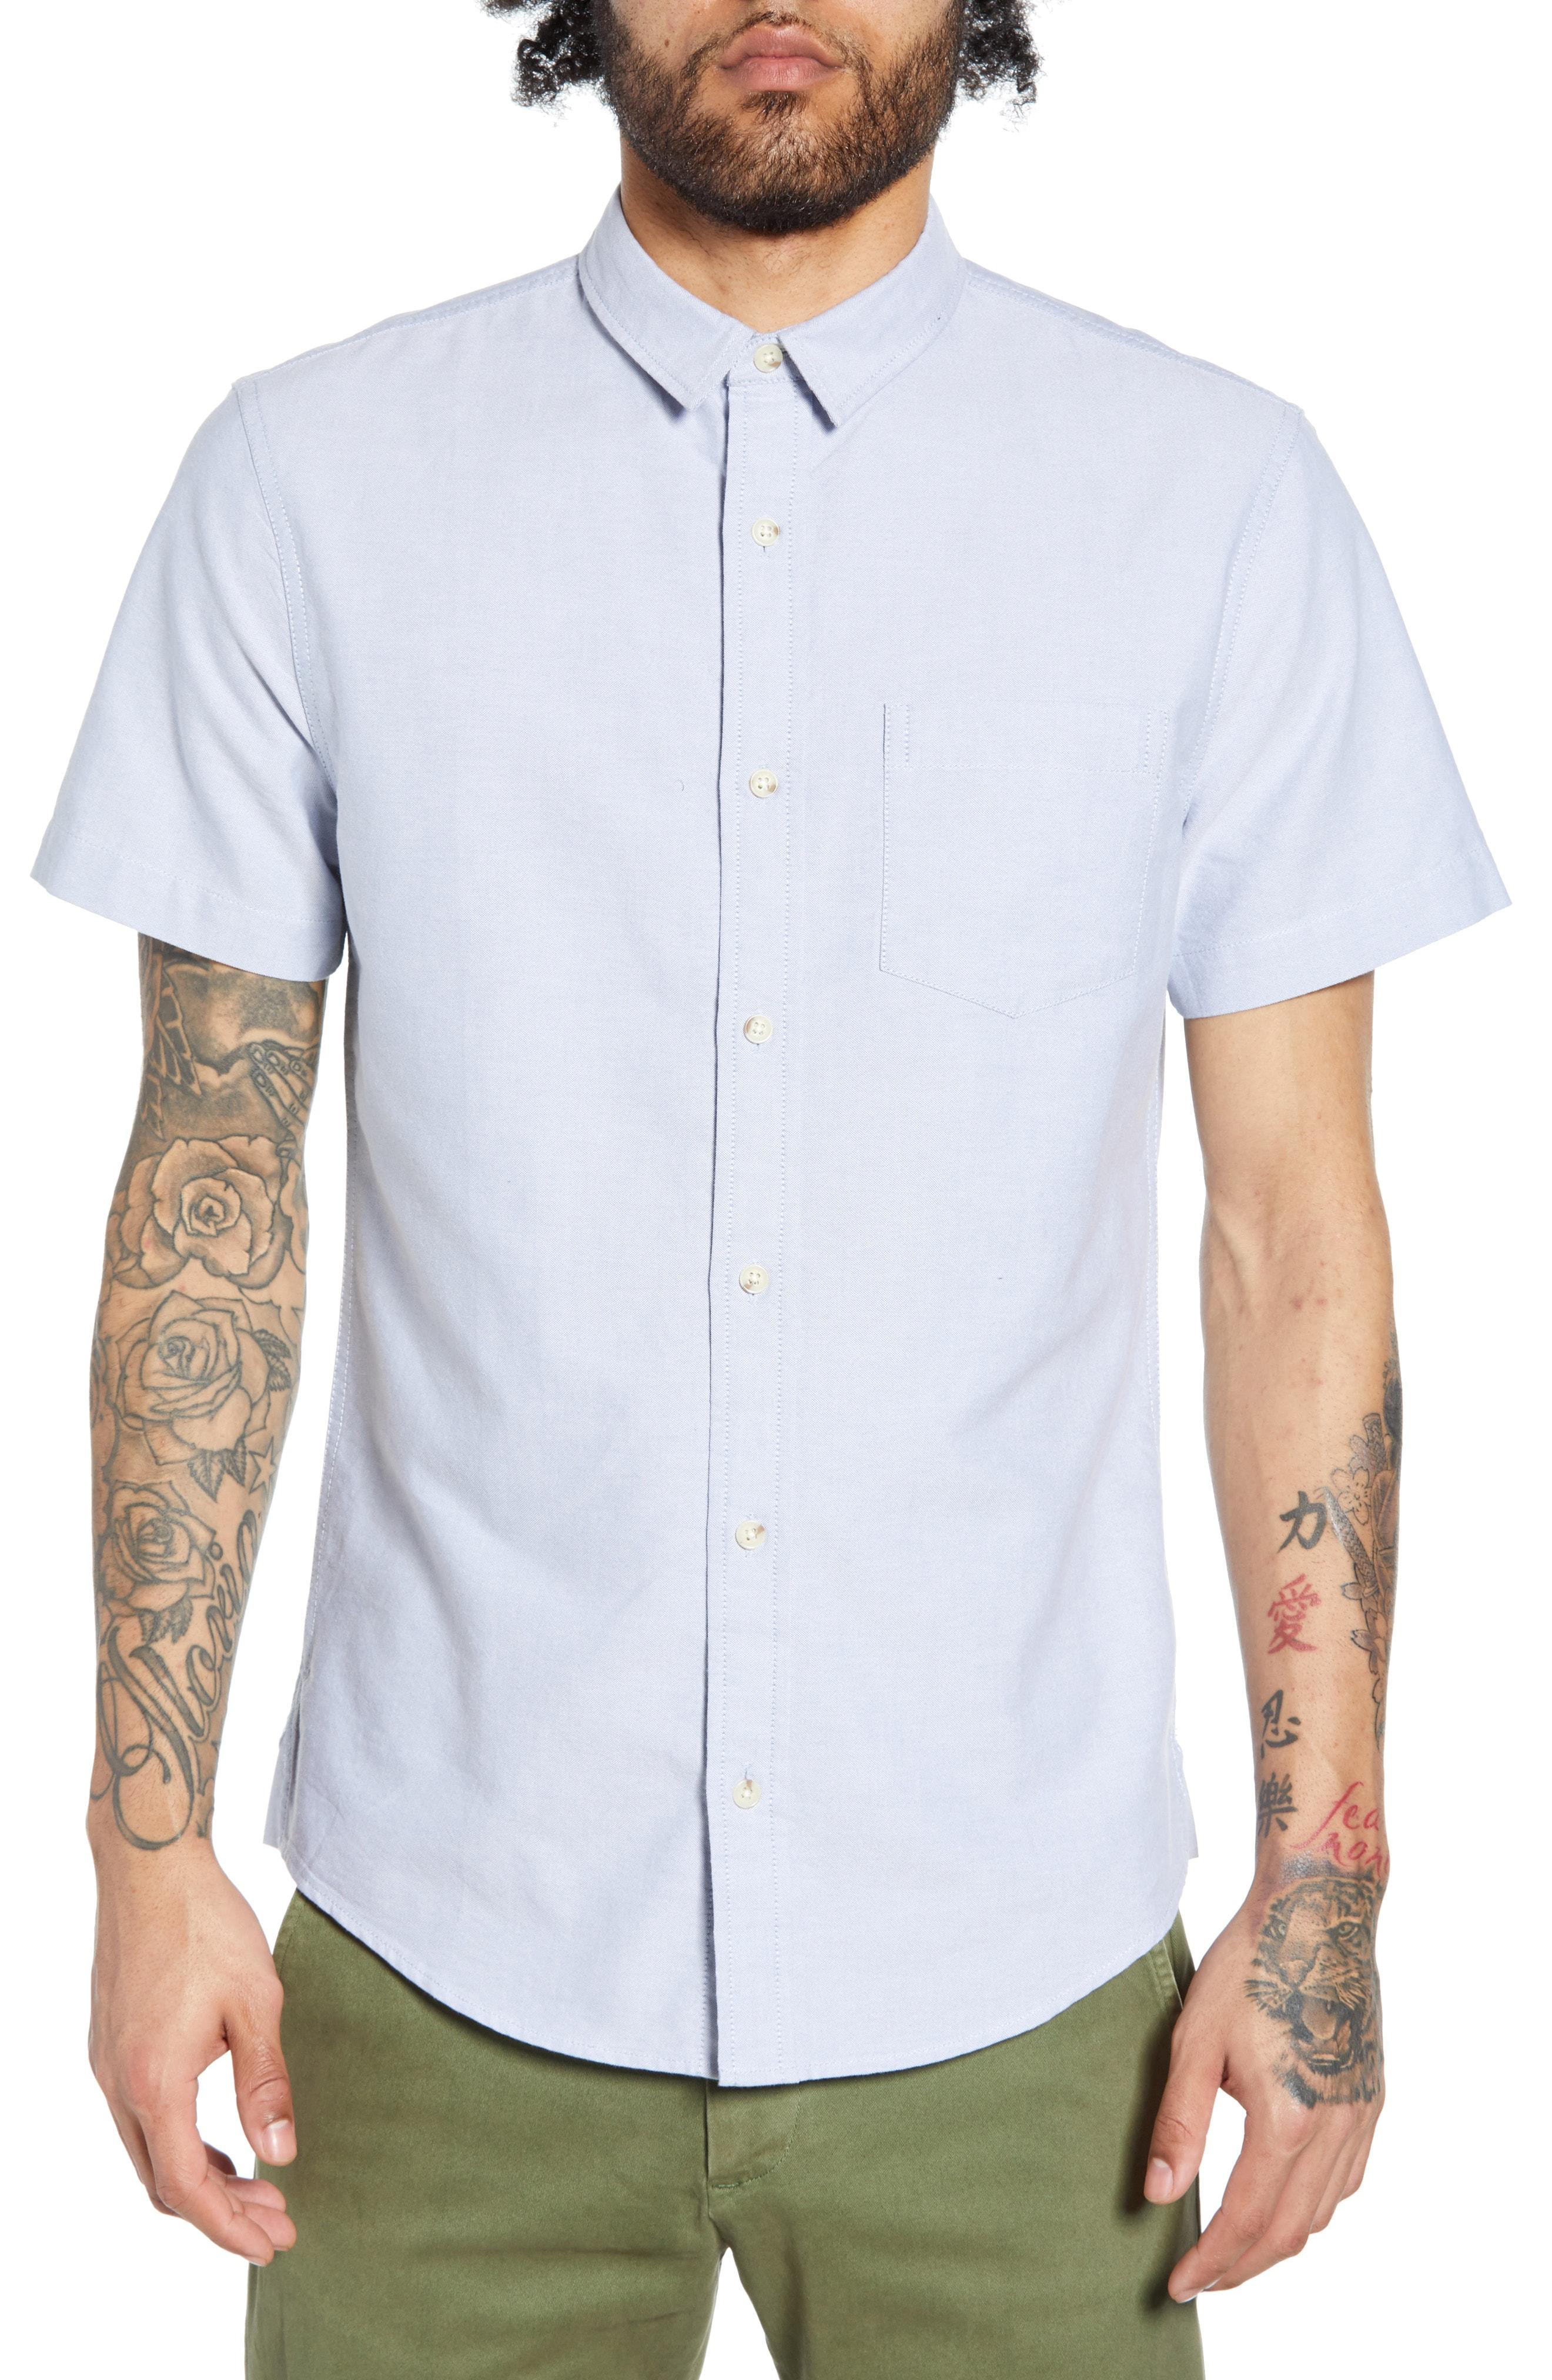 Lyst - The Rail Oxford Cloth Woven Shirt in White for Men